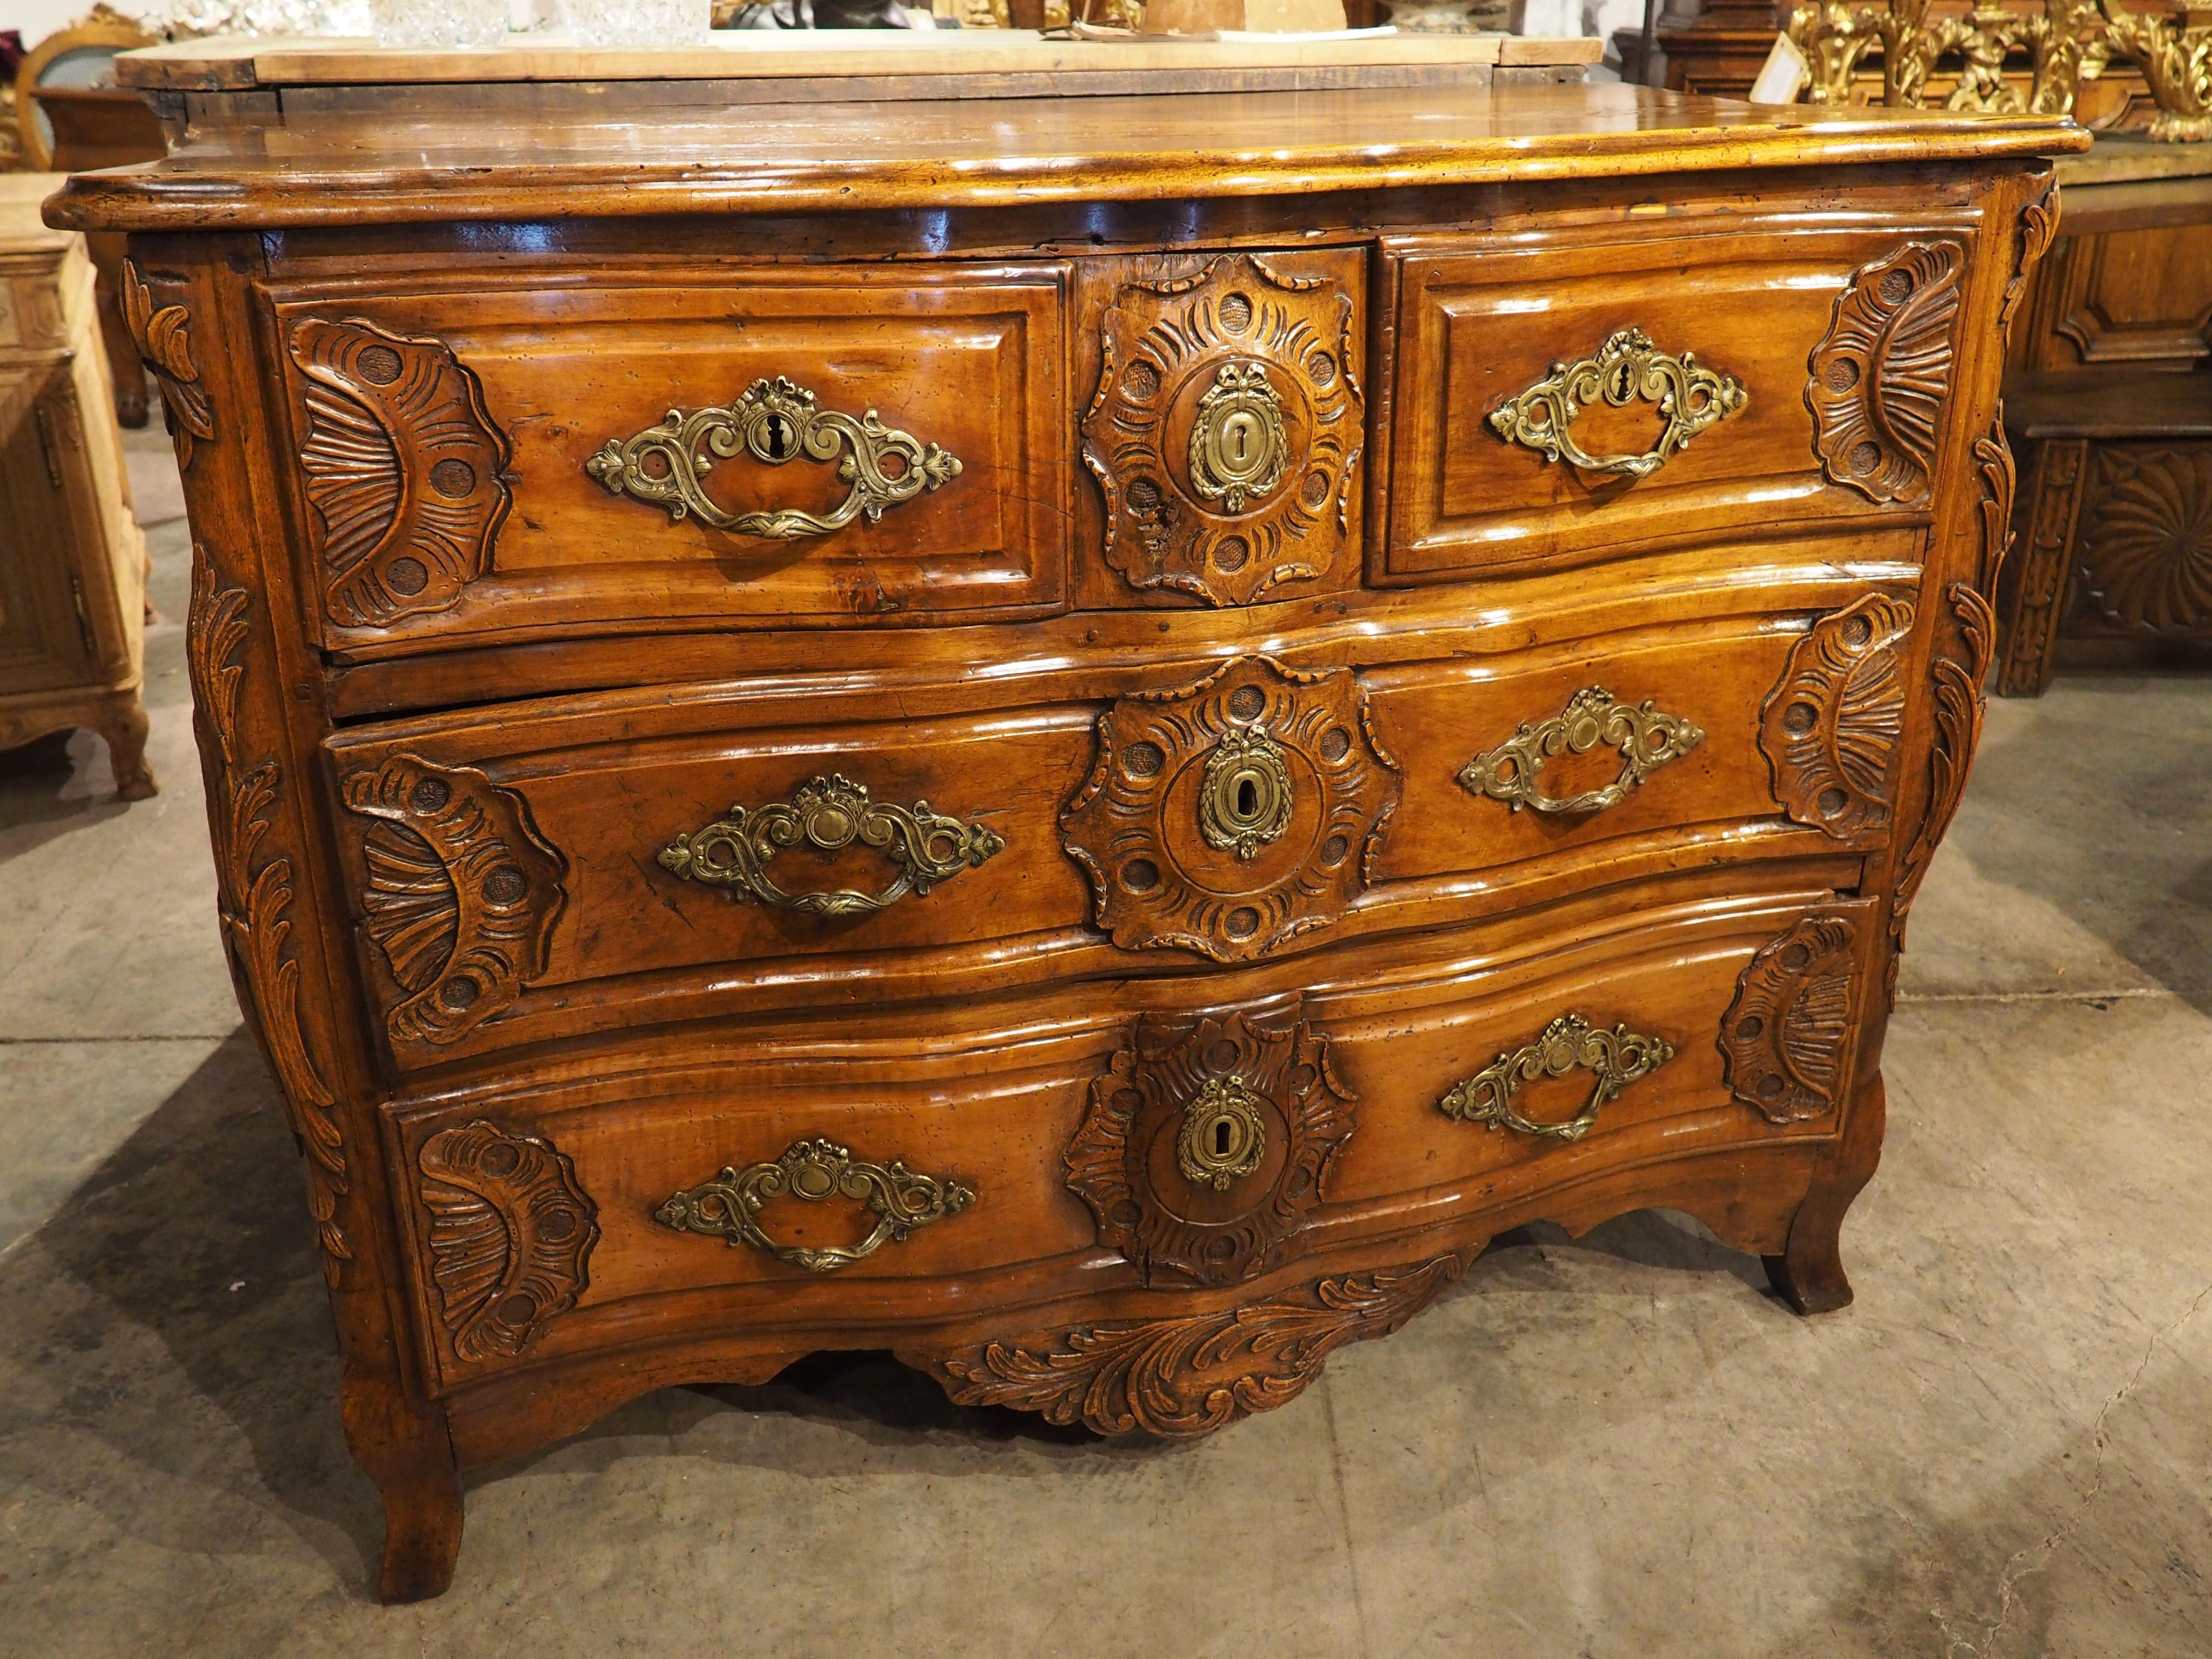 Furniture from the Regence period of the early 1700s incorporates elements from the reigns of Louis XIV and Louis XV, the preceding and subsequent styles, respectively. A beautiful example of this balance can be seen in our hand-carved walnut